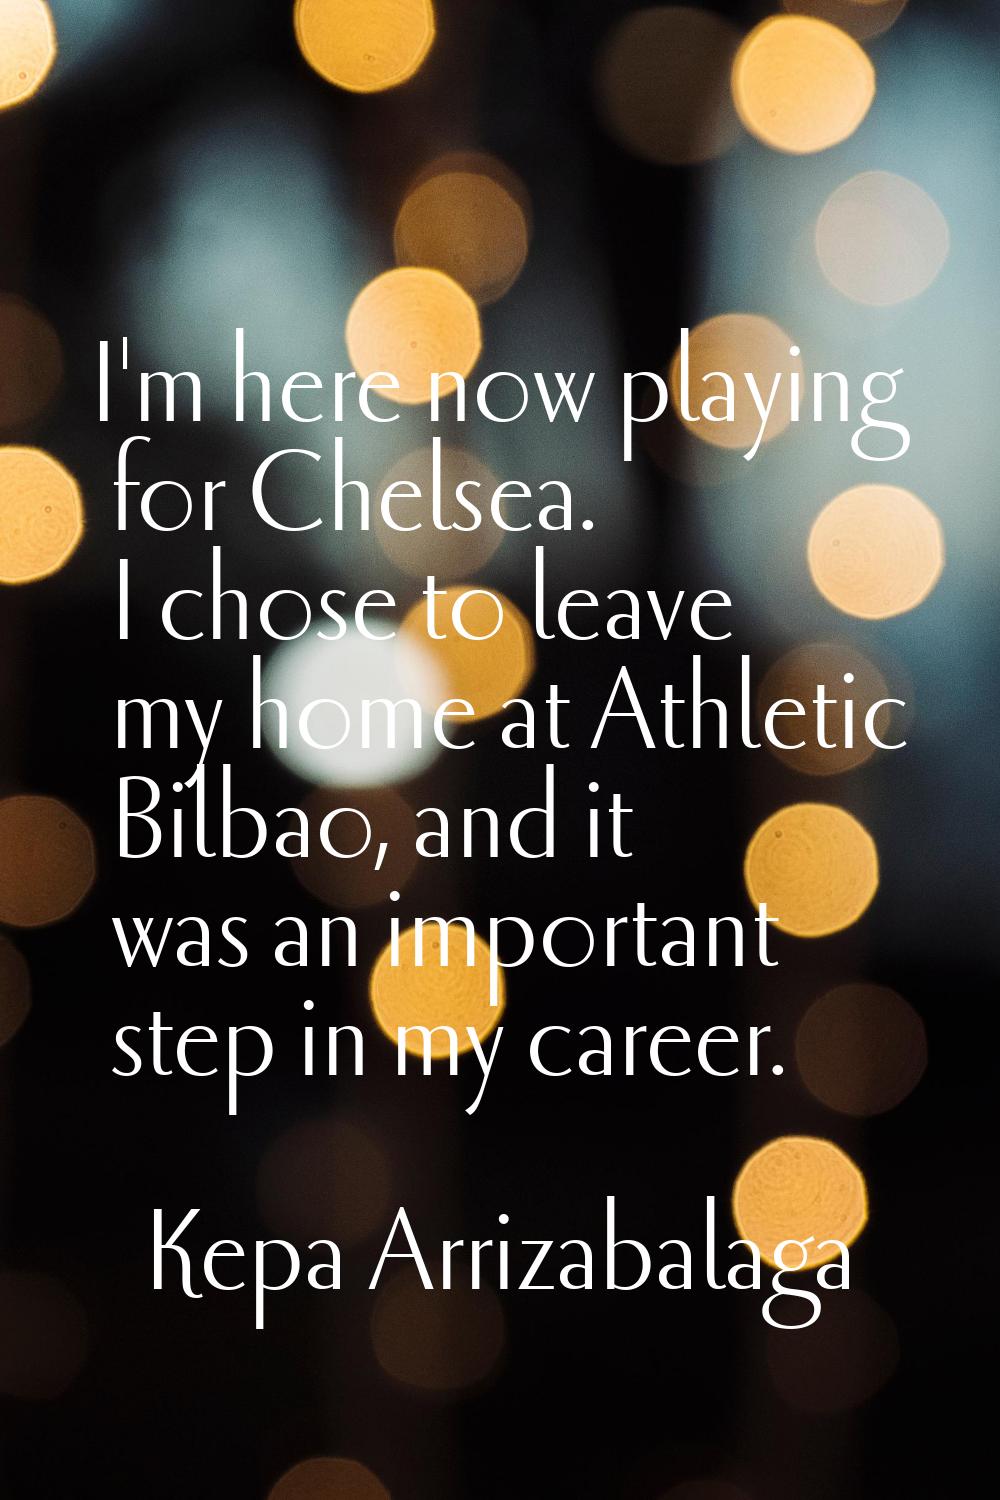 I'm here now playing for Chelsea. I chose to leave my home at Athletic Bilbao, and it was an import